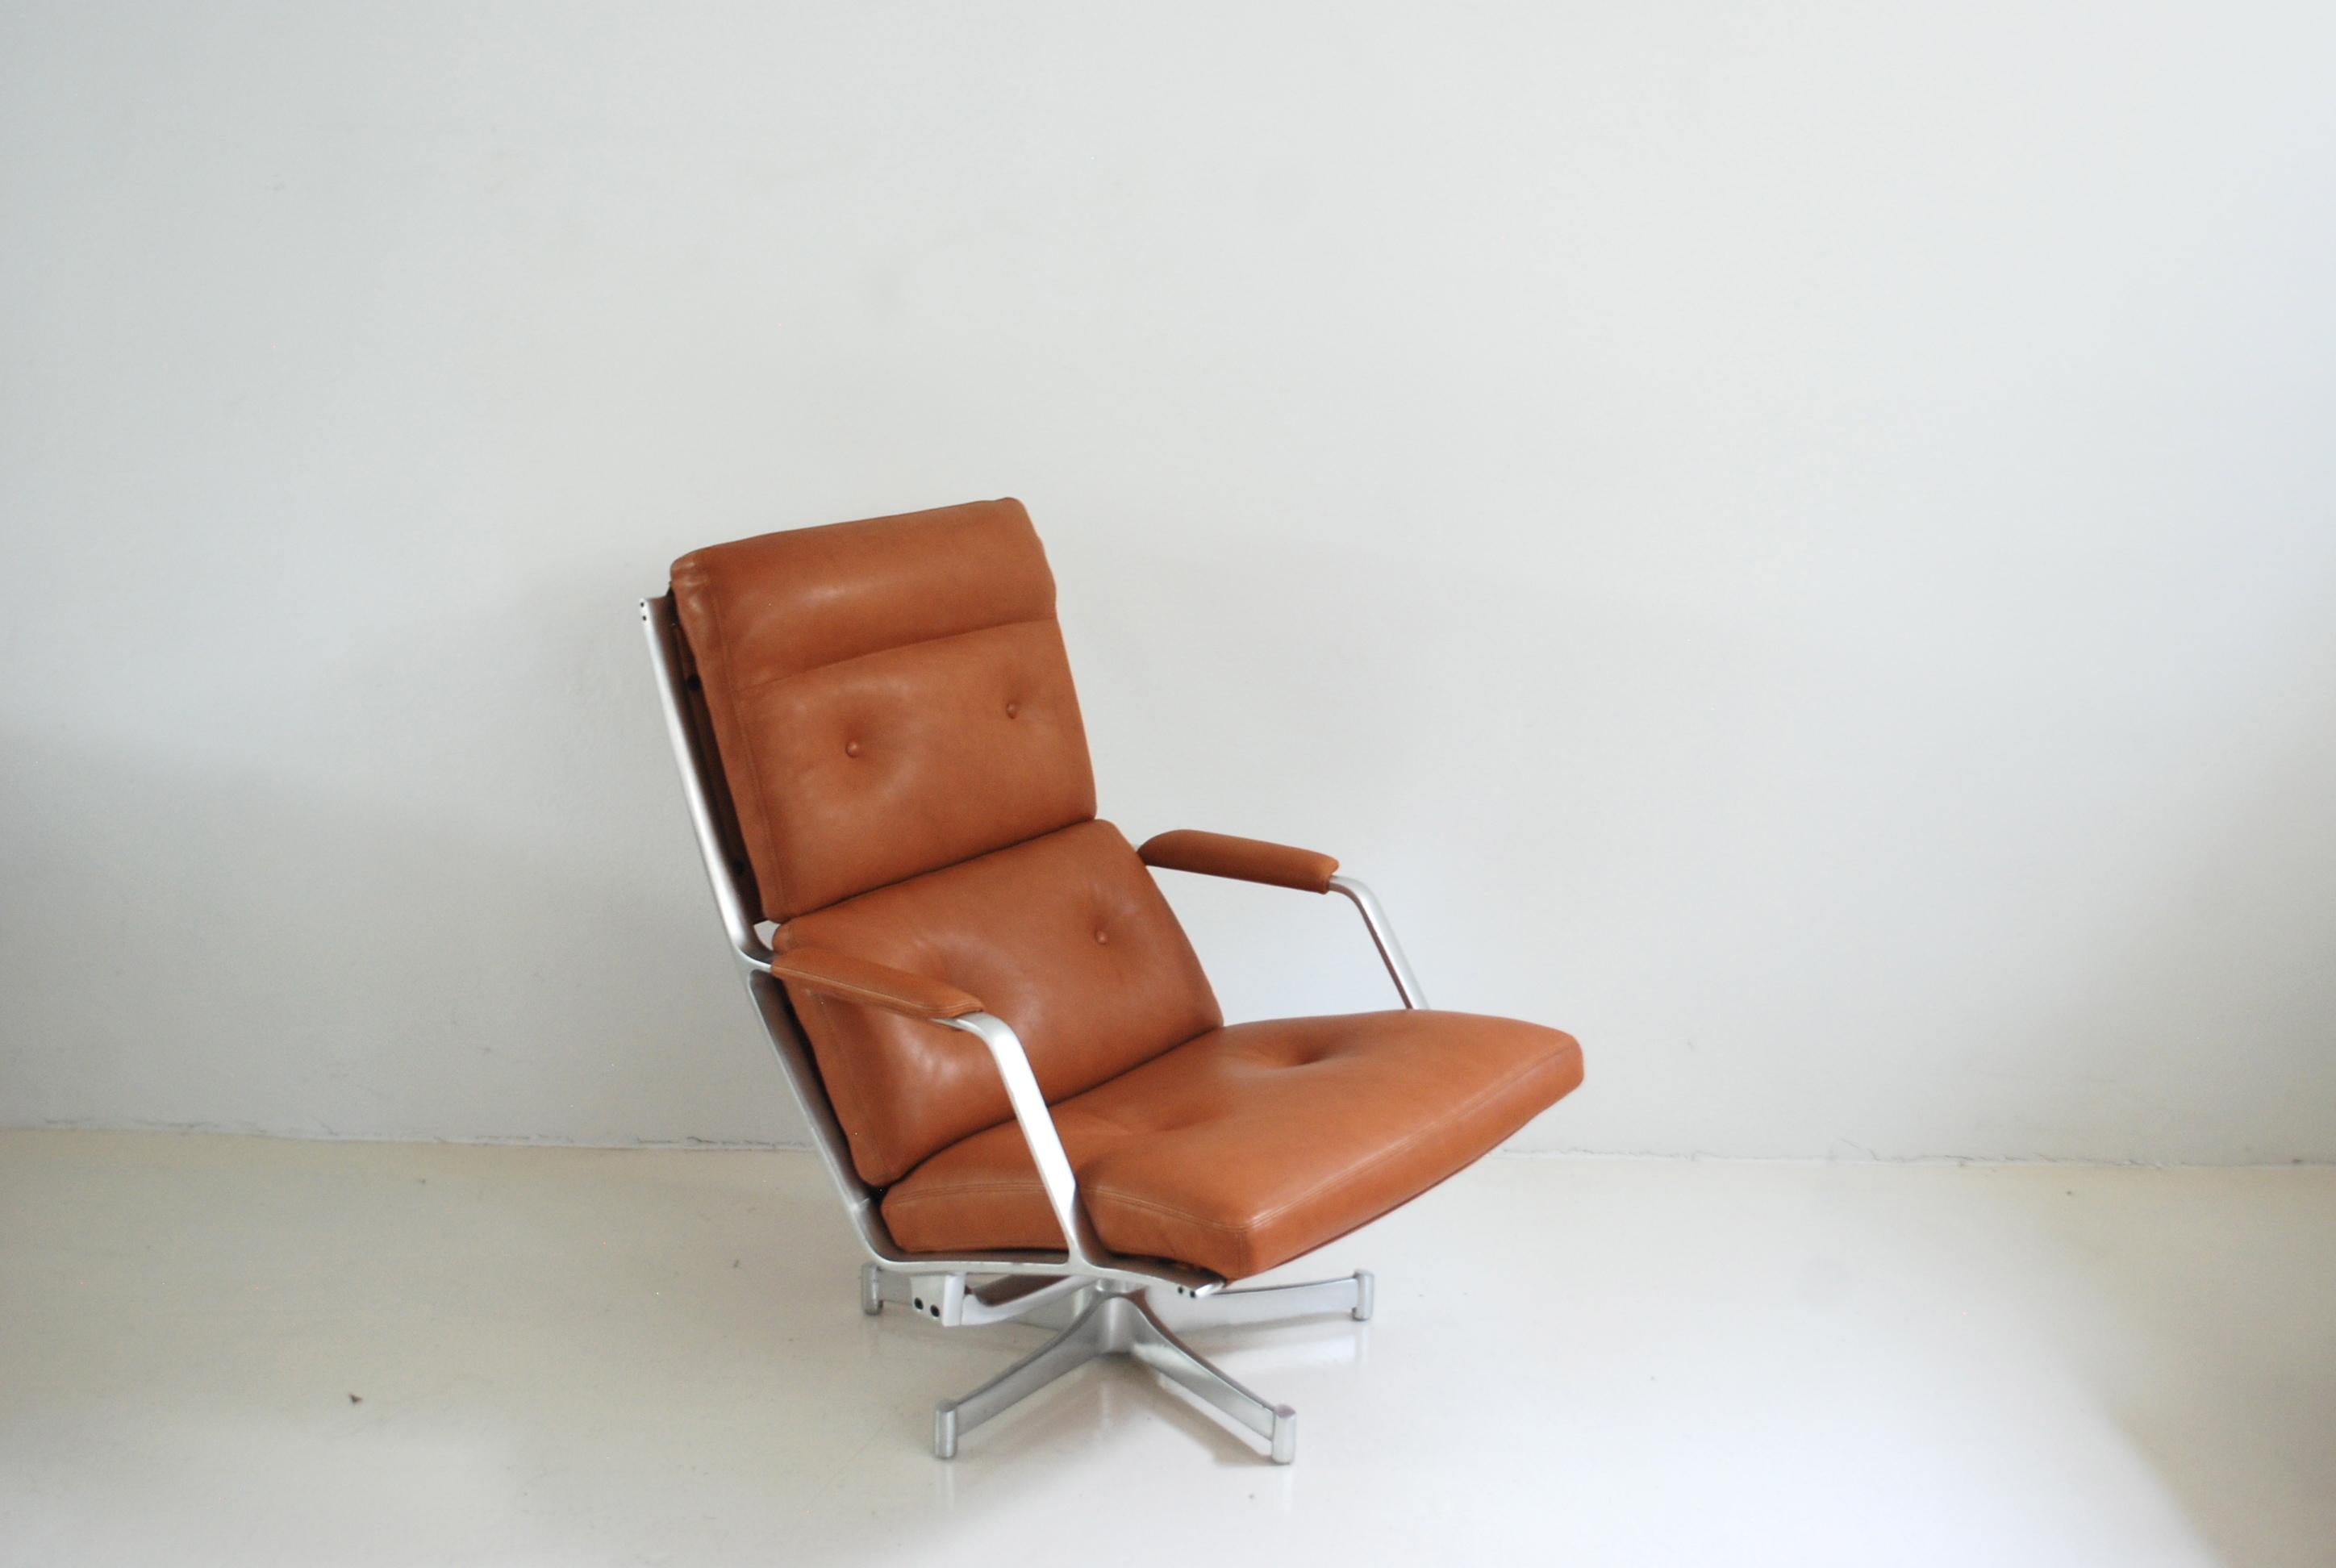 This lounge chair FK 85 was made by Jorgen Kastholm & Preben Fabricius for Kill international.
The lounge chair has a swivel aluminium frame and soft cognac natural leather.
It was new upholstered with soft premium aniline leather. The touch of